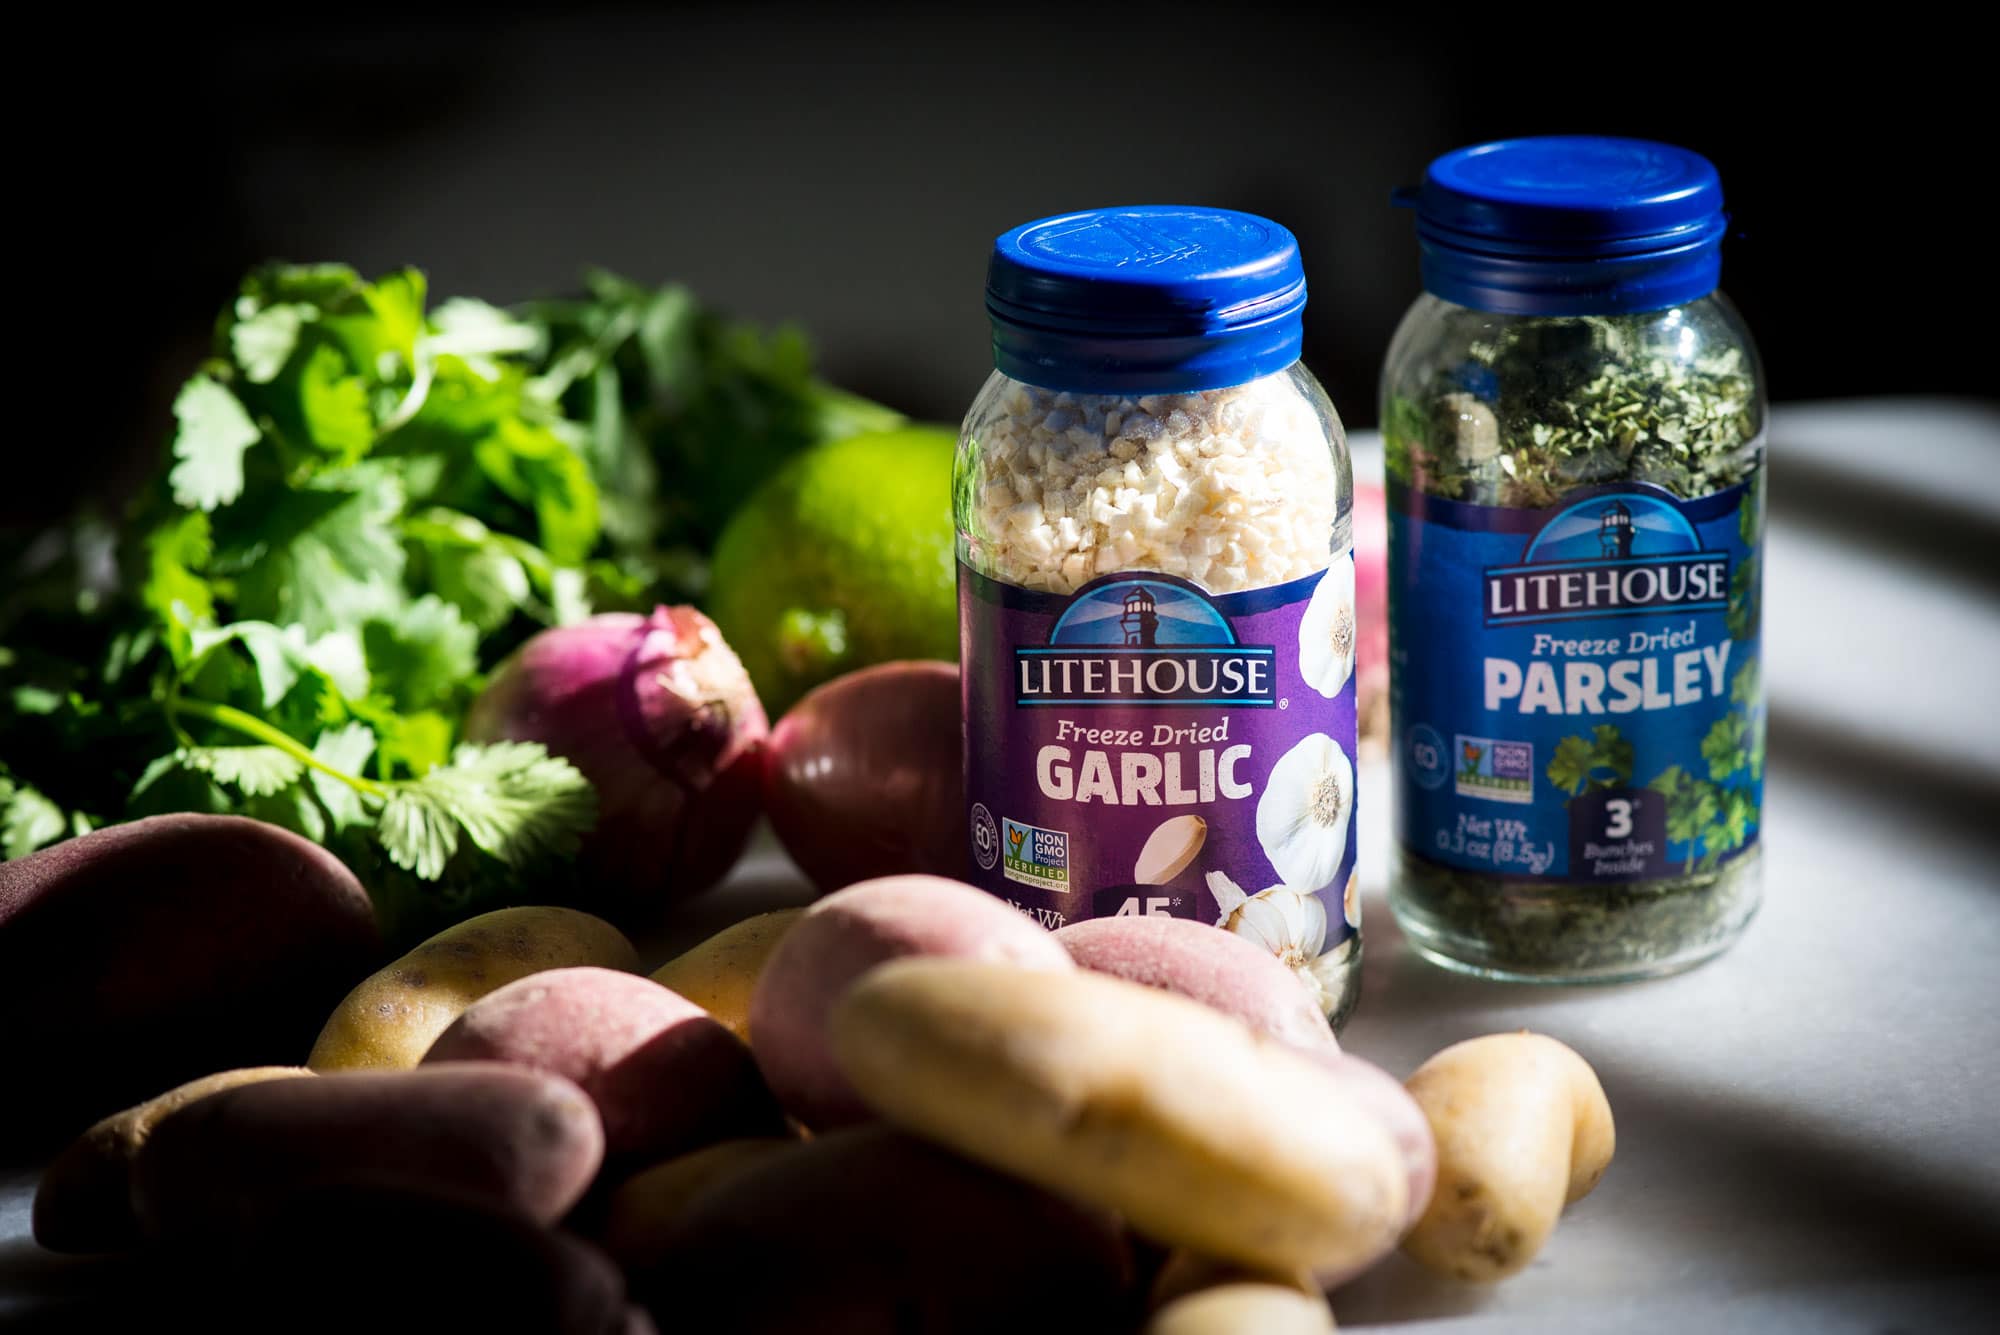 Litehouse garlic and parsley freeze dried herbs in jars